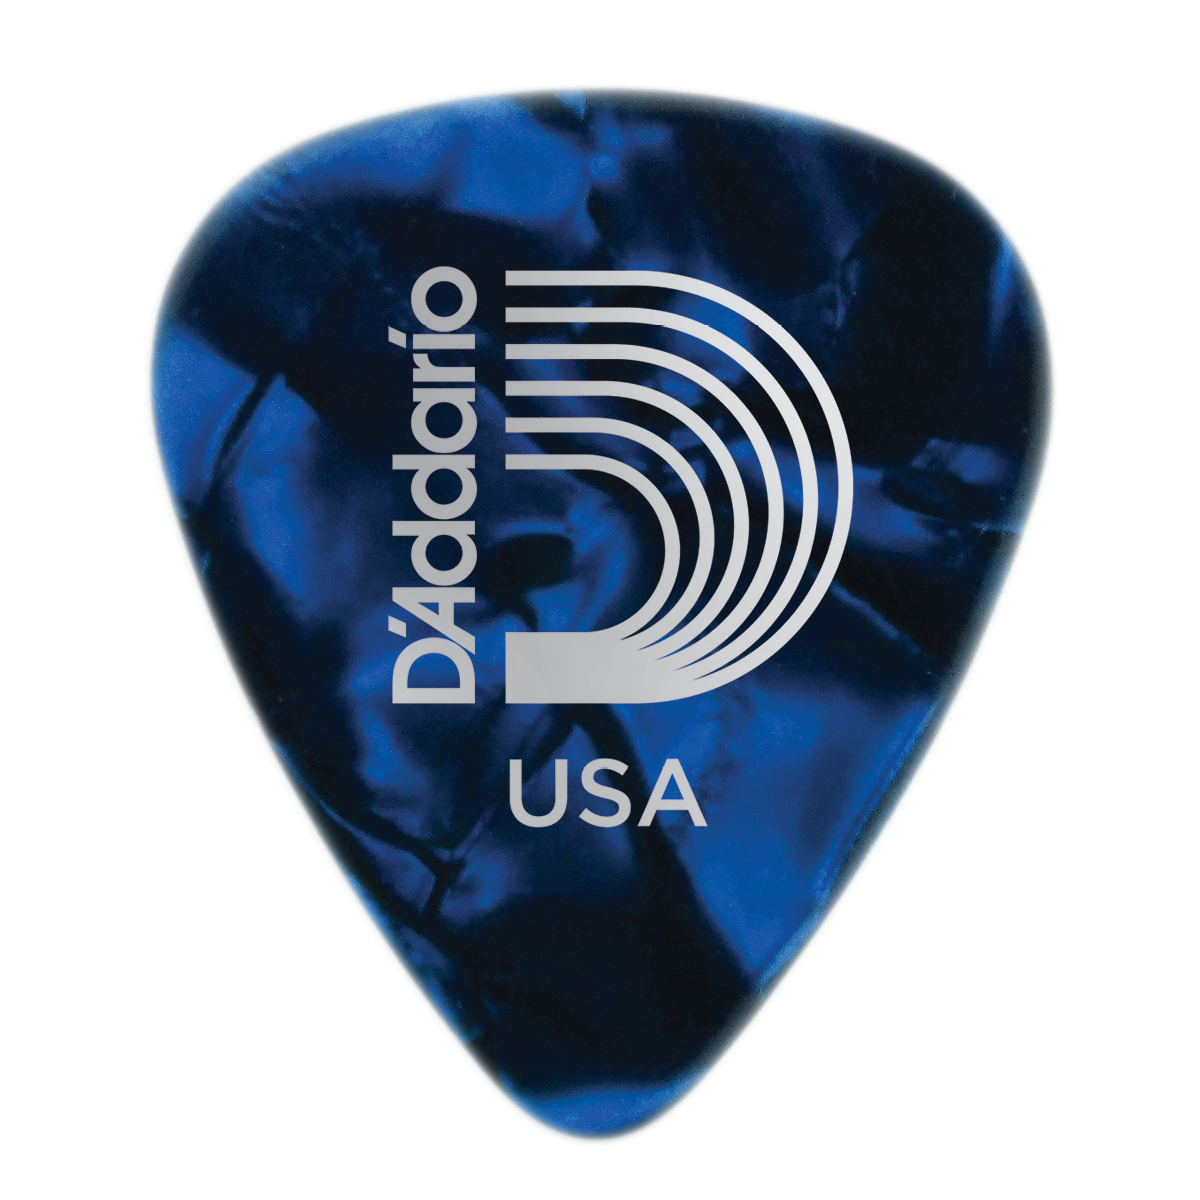 D'Addario Blue Pearl Celluloid Guitar Pick, Extra Heavy